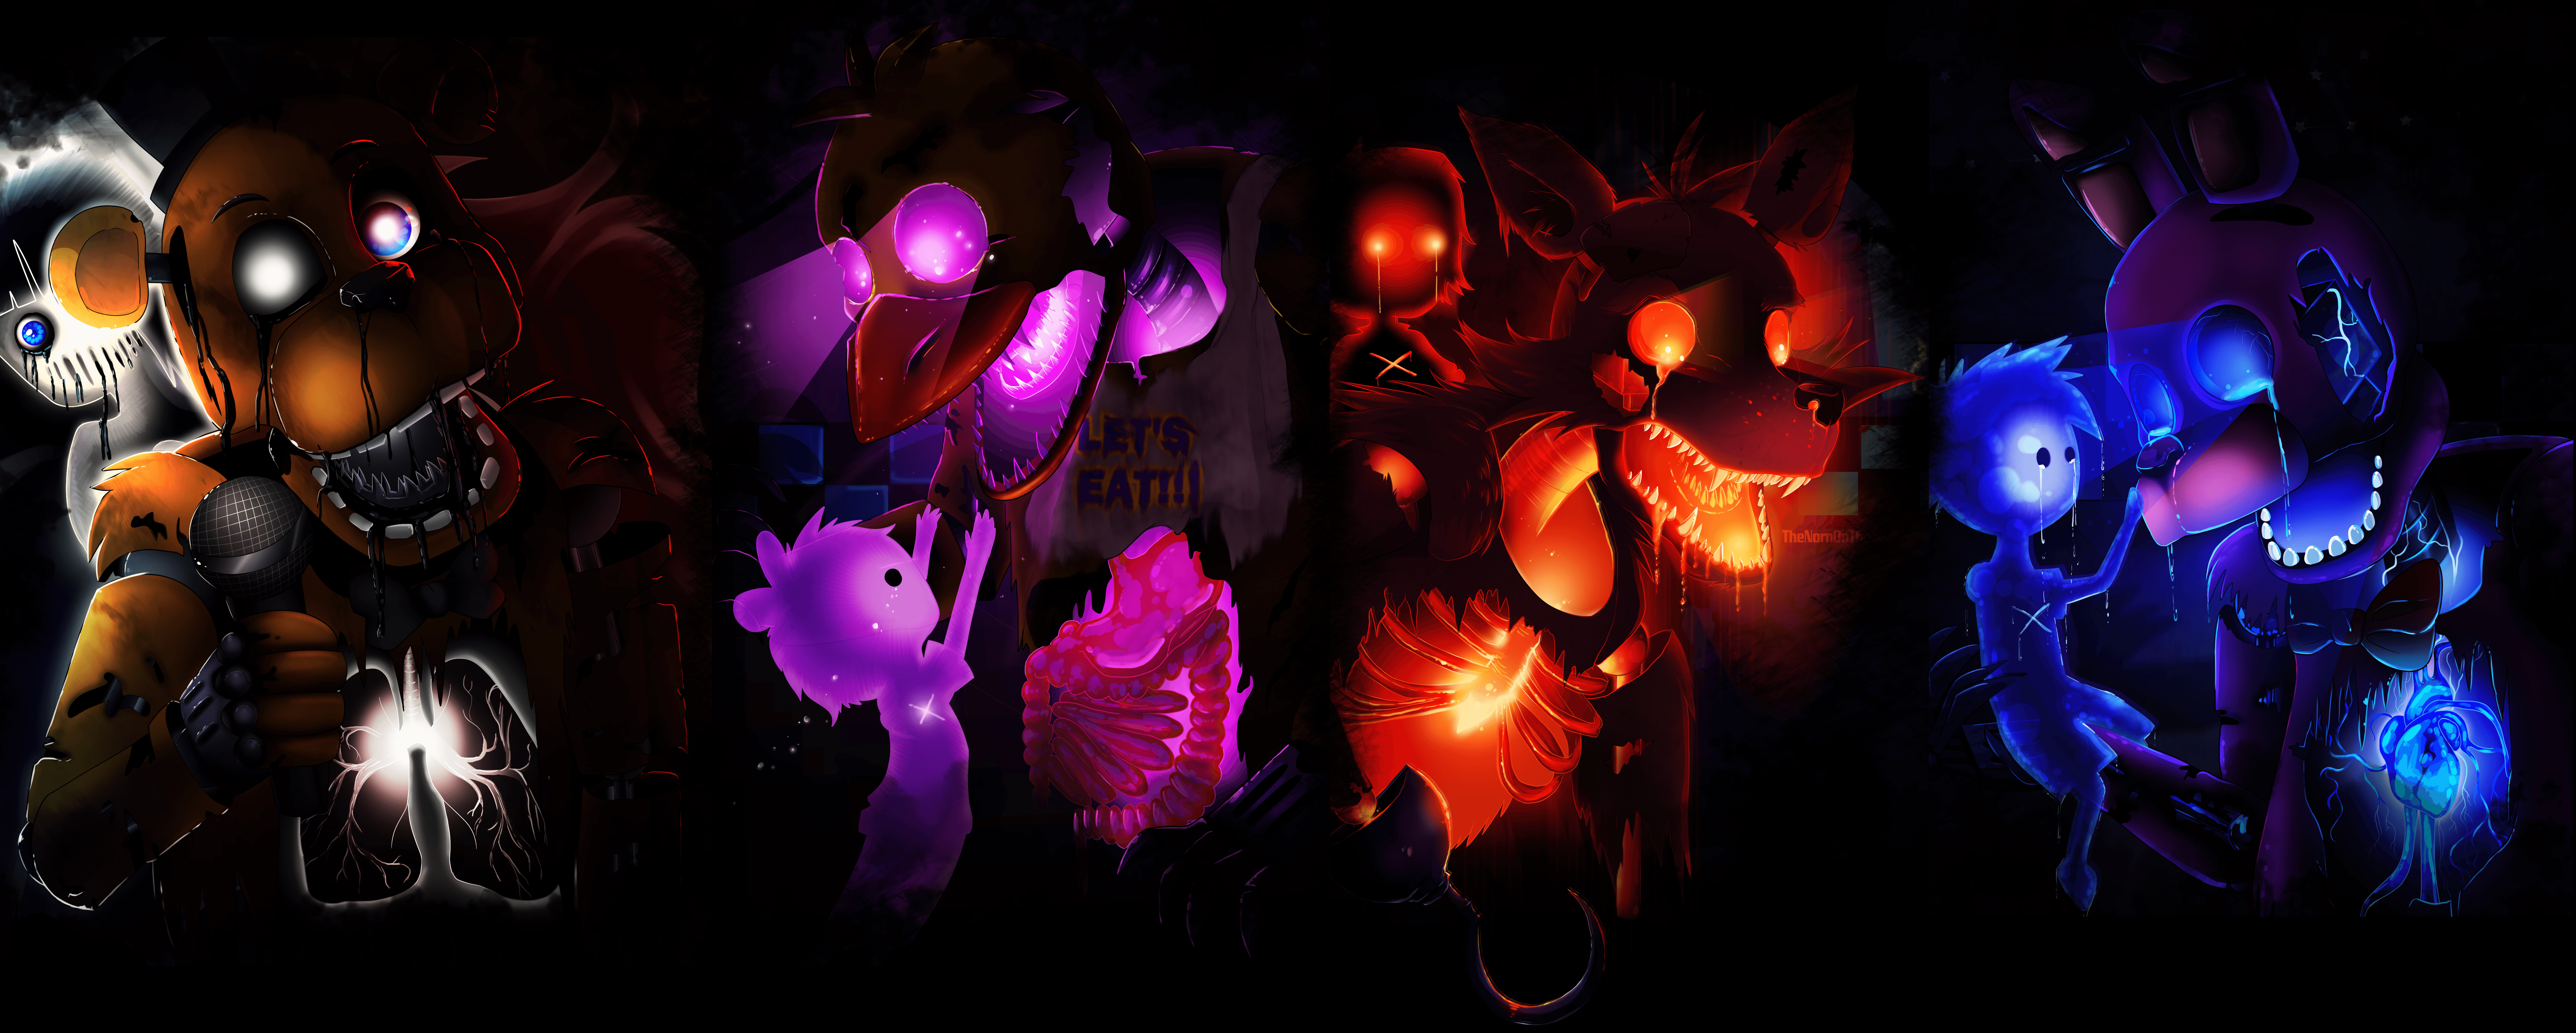 Bonnie Five Nights At Freddy 039 S Chica Five Nights At Freddy 039 S Foxy Five Nights At Freddy 039  7981x3202